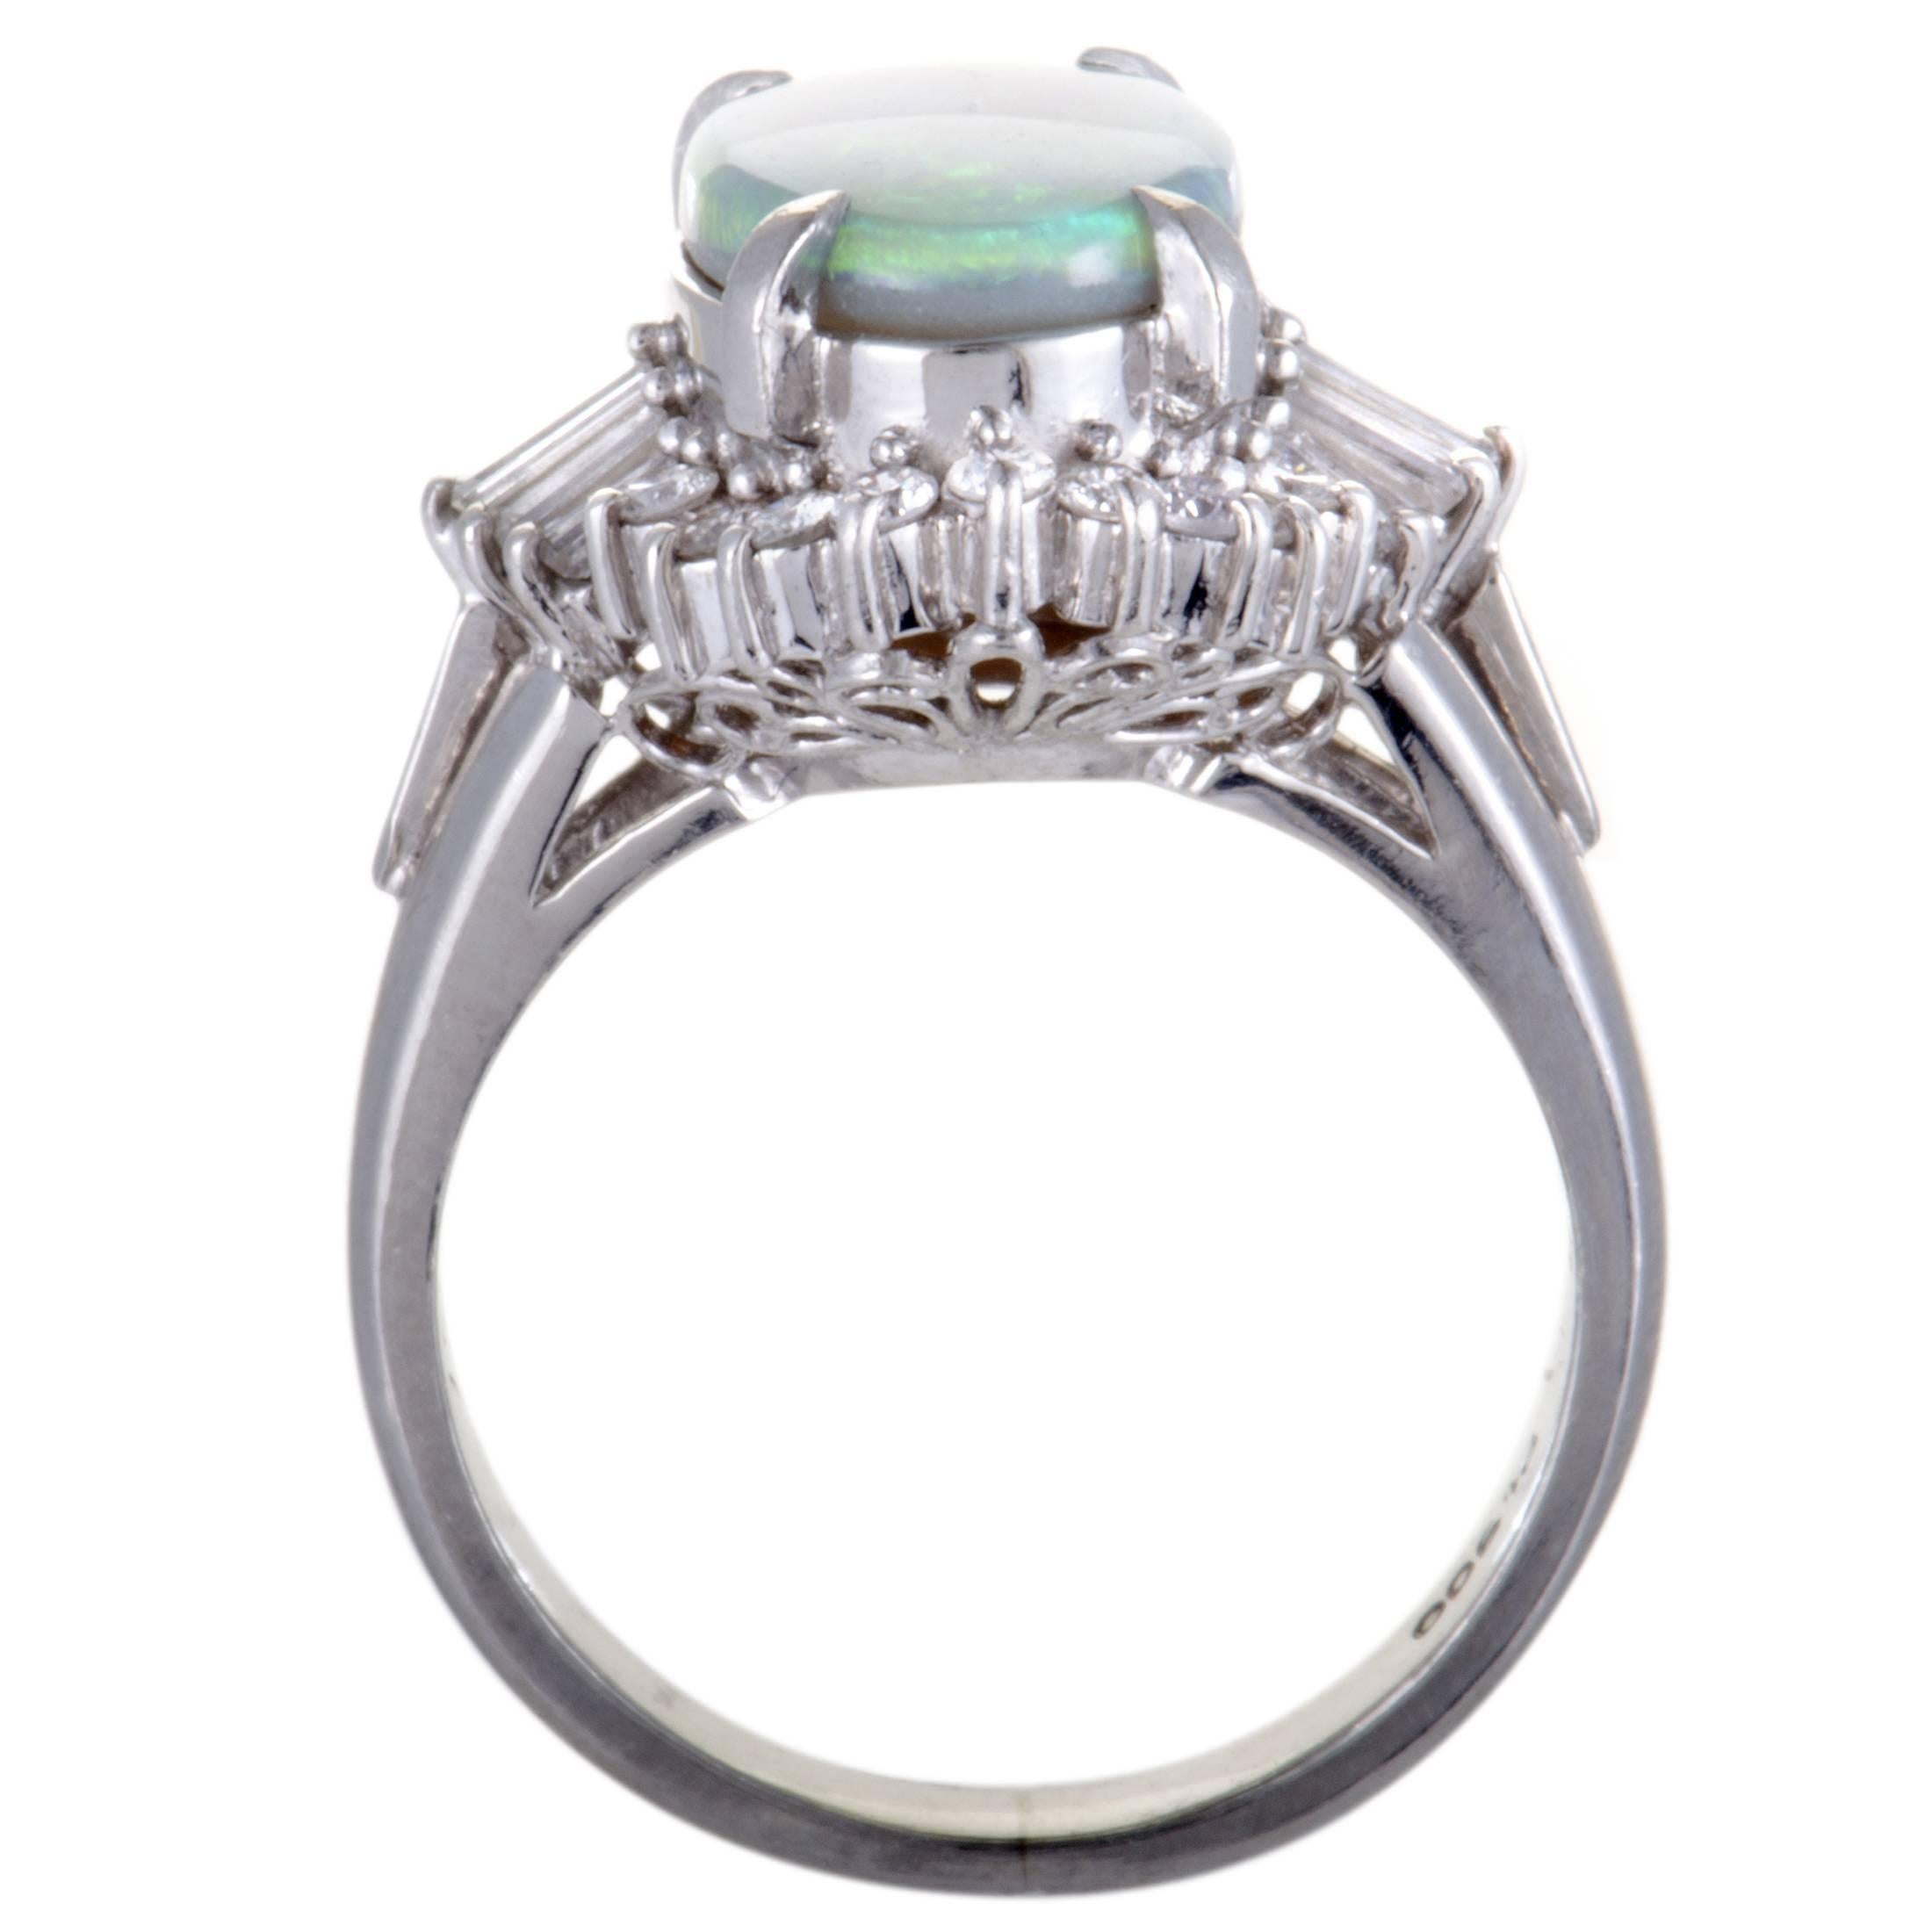 This beautiful platinum ring epitomizes elegance and class. The spectacular ring is adorned in a sparkling pave of 0.57ct diamonds that surrounds a dazzling green opal, weighing 1.93ct, that gives the ring an extravagantly stylish appeal.
Ring Top